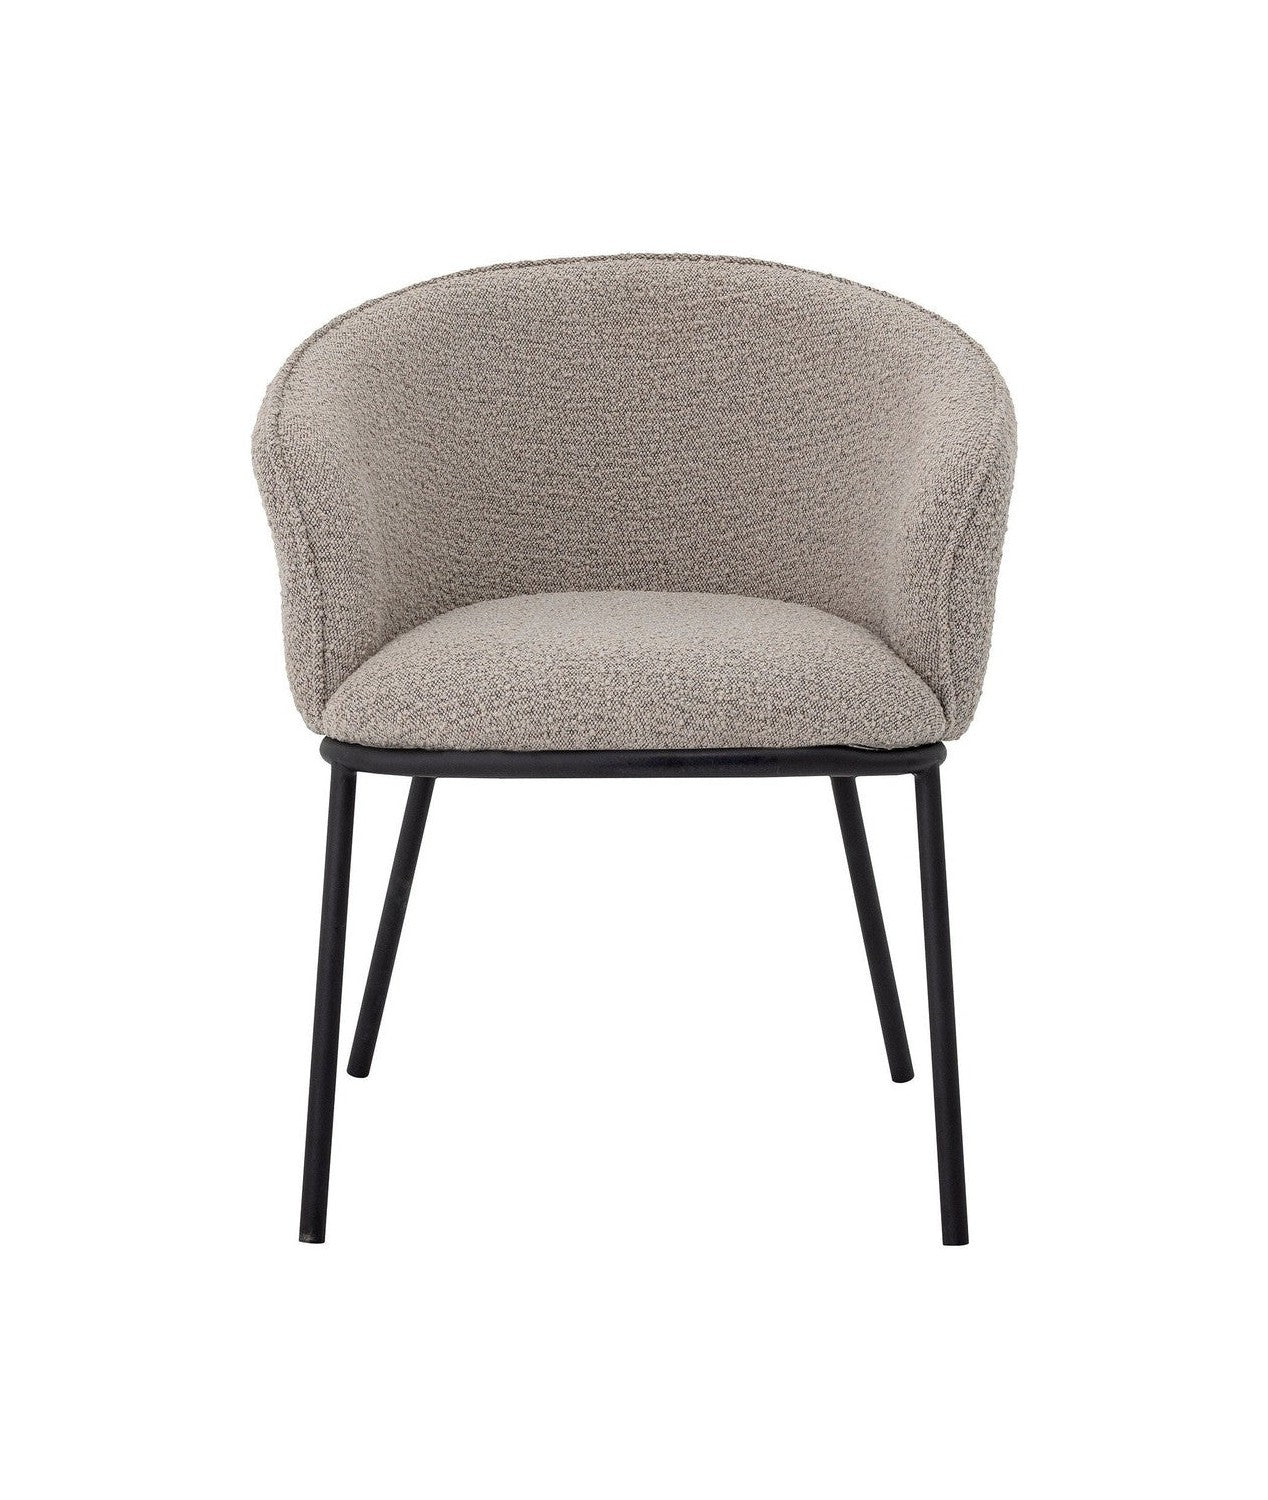 Bloomingville Cortone Dining Chair, Grey, Polyester